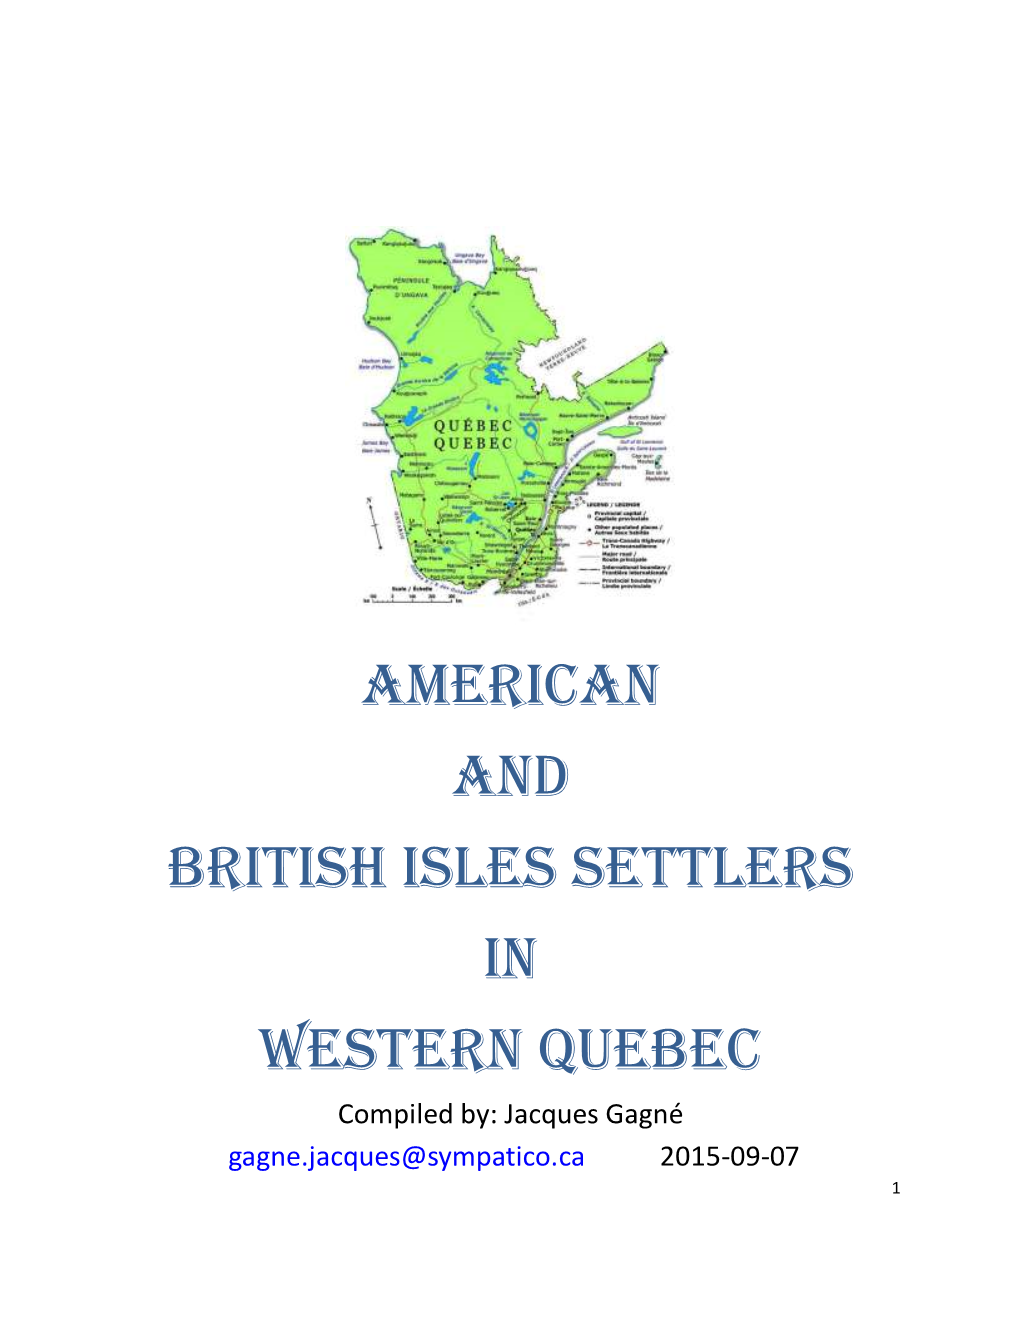 American and British Isles Settlers in Western Quebec Compiled By: Jacques Gagné Gagne.Jacques@Sympatico.Ca 2015-09-07 1